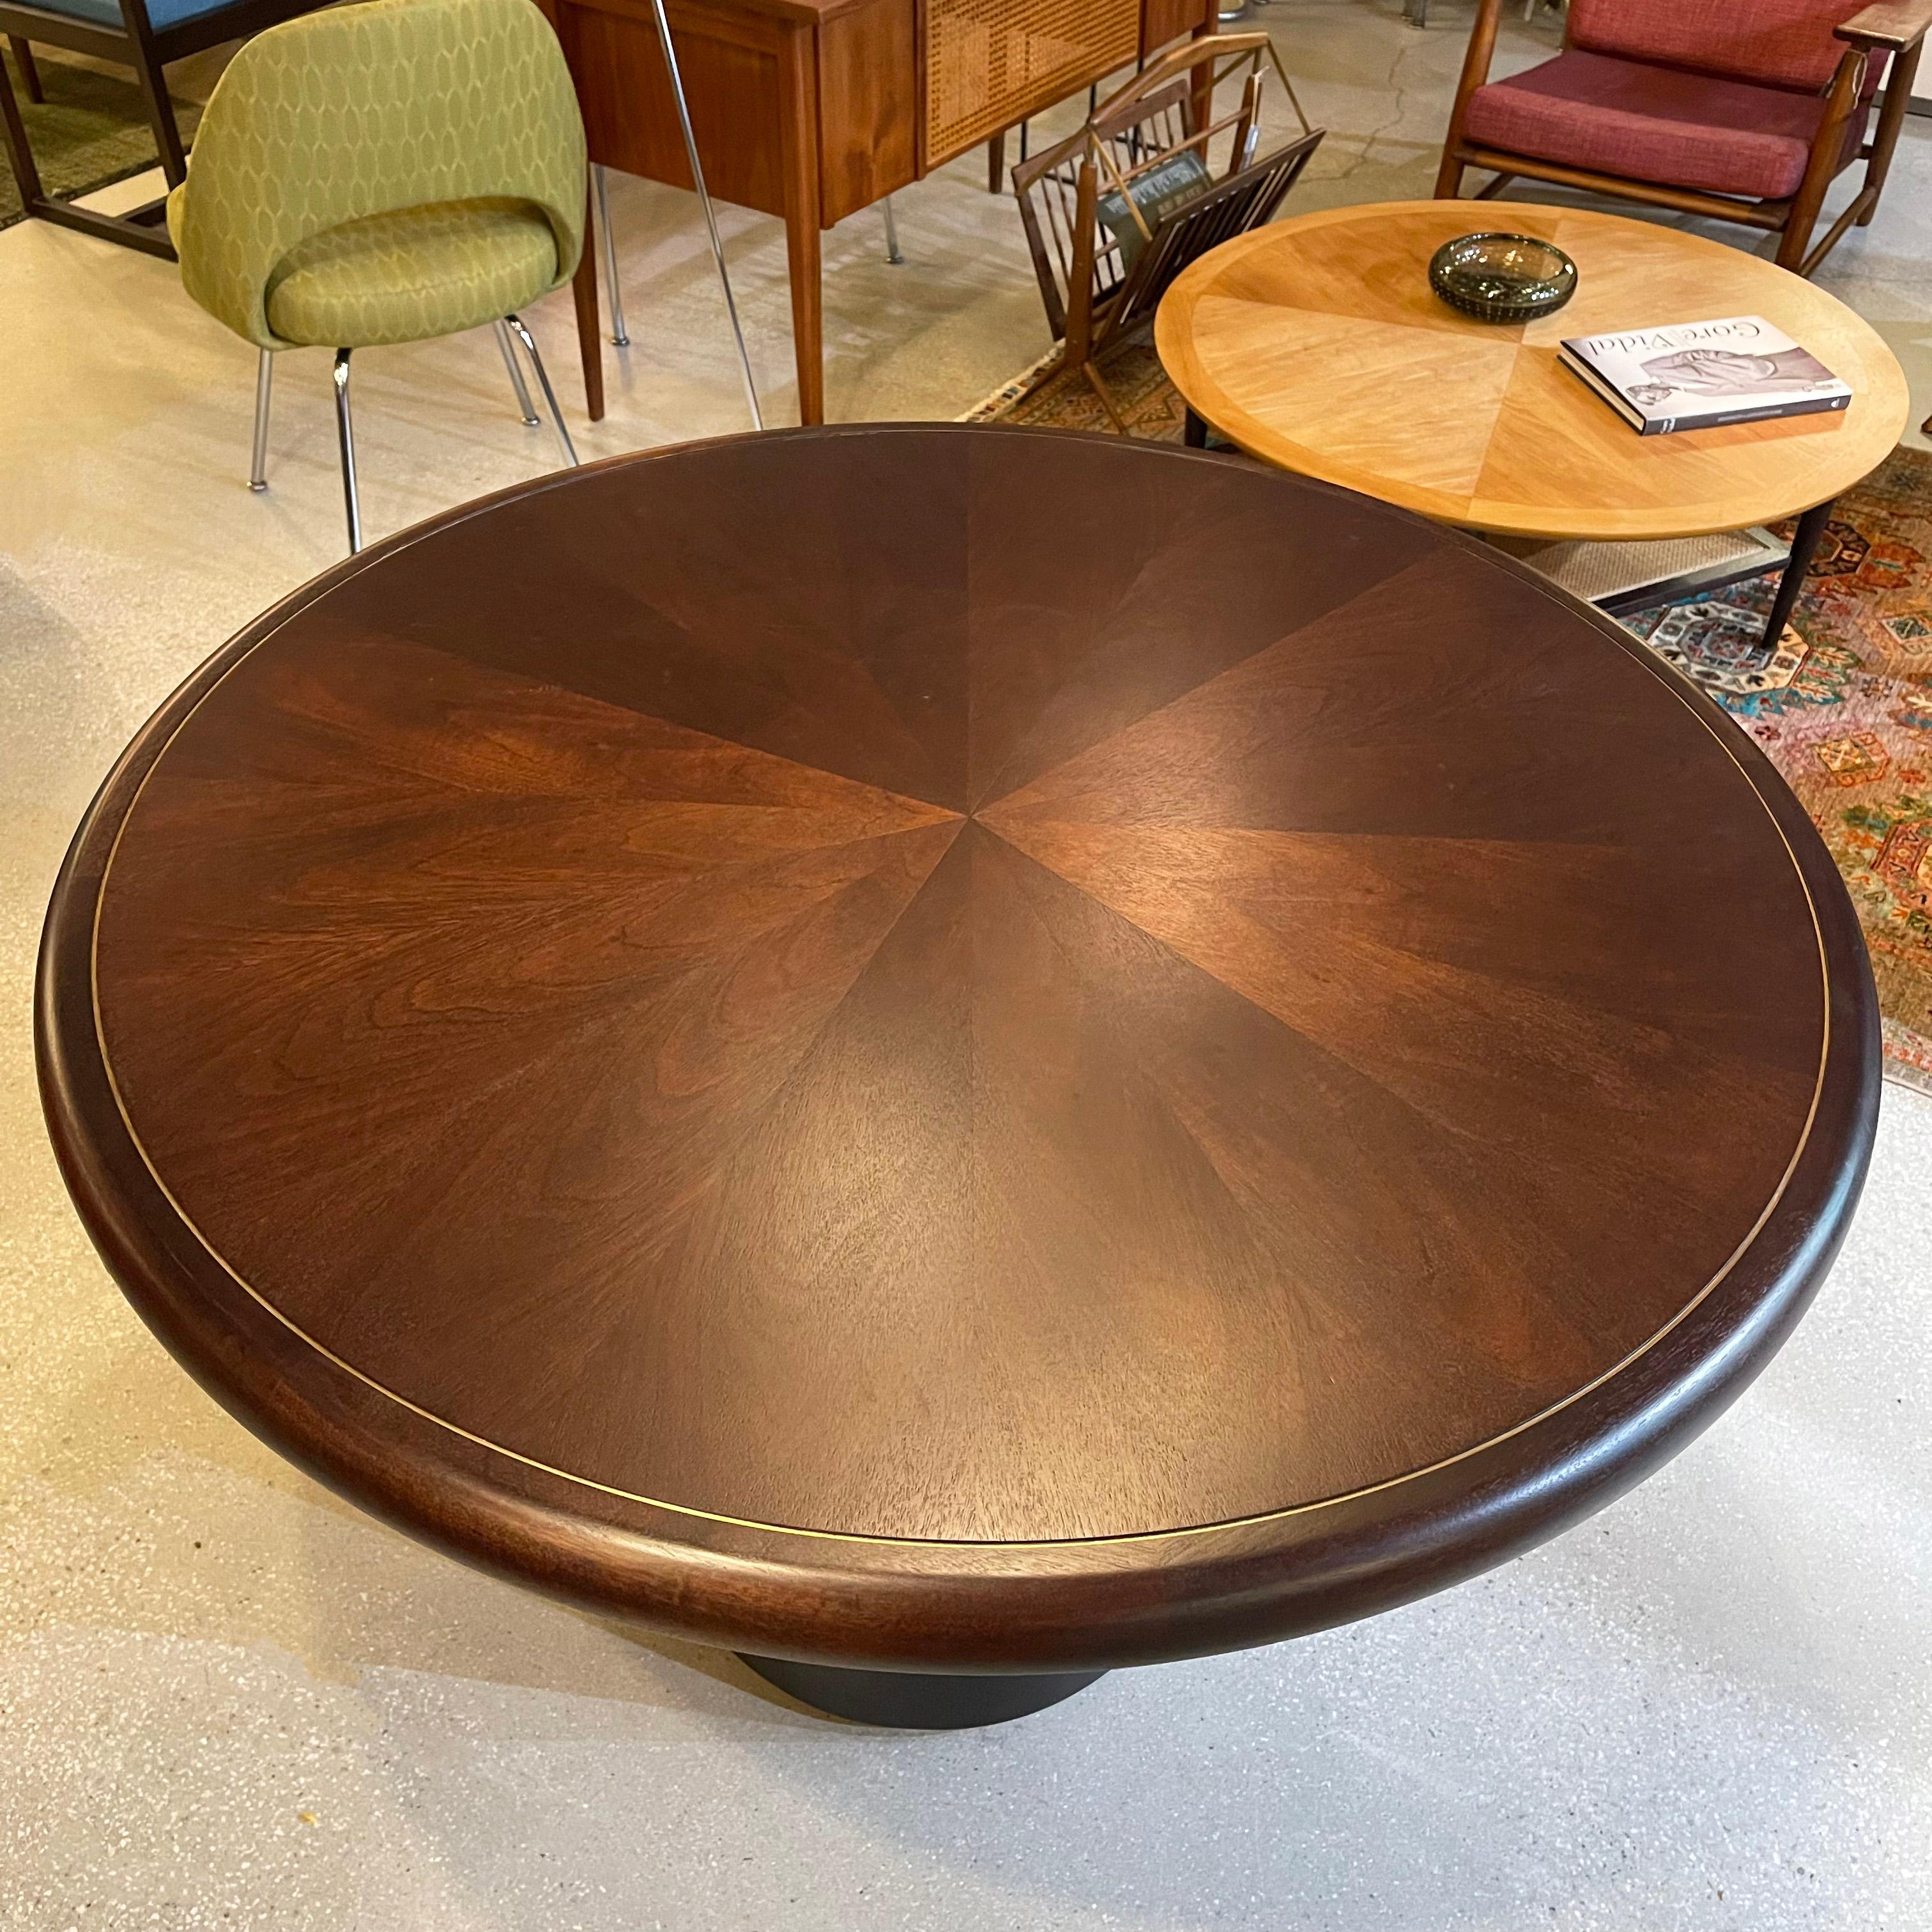 Mid-Century Modern Round Bookmatched Rosewood Pedestal Dining Table By Edward Wormley For Dunbar For Sale